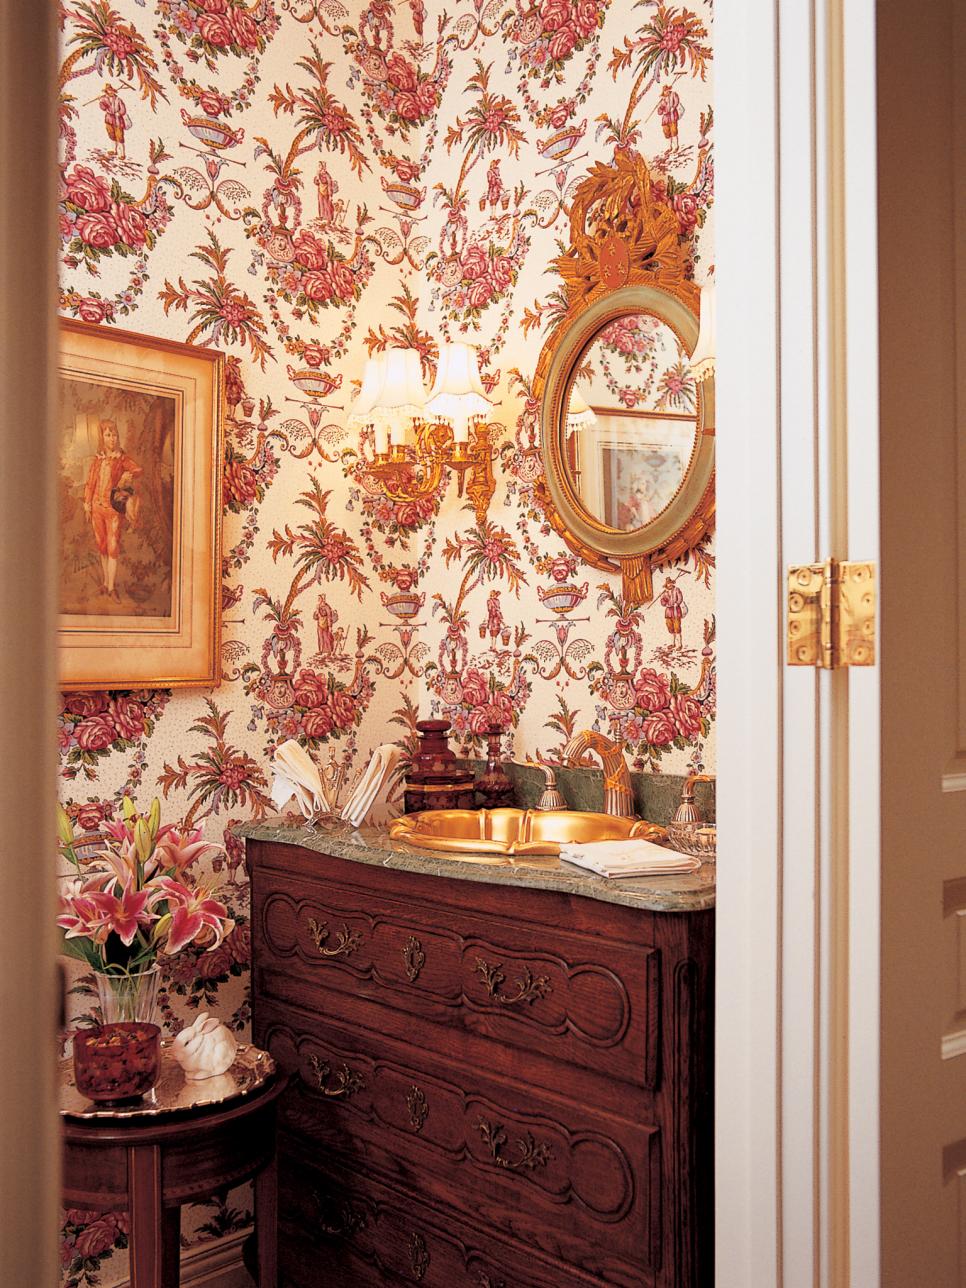 Victorian Powder Room with Red Floral Wallpaper